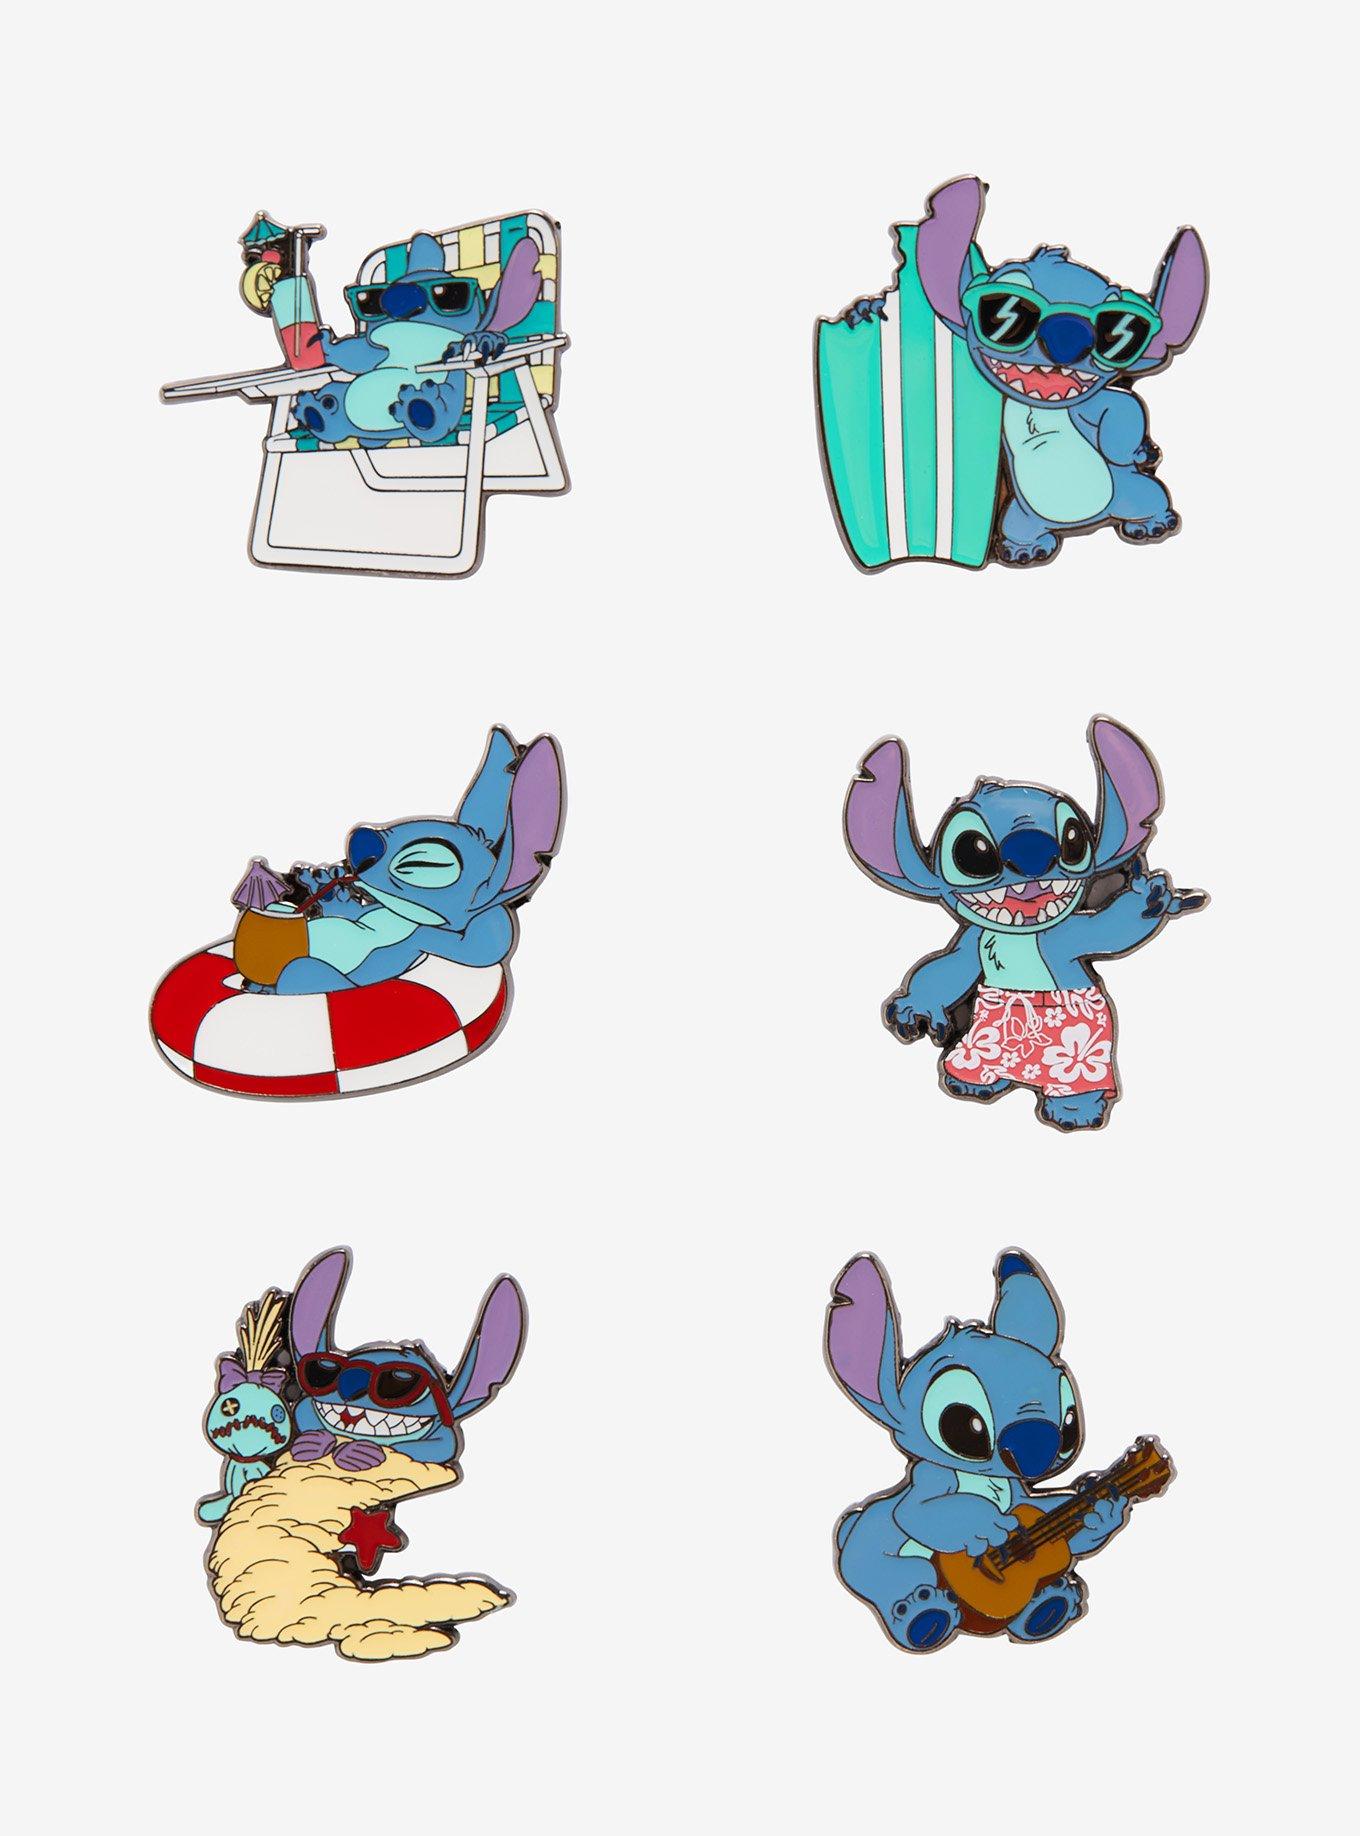 63588 - Stitch in Lounge Chair - Hot Topic - Summer Stitch Blind Box -  Loungefly Disney Pin